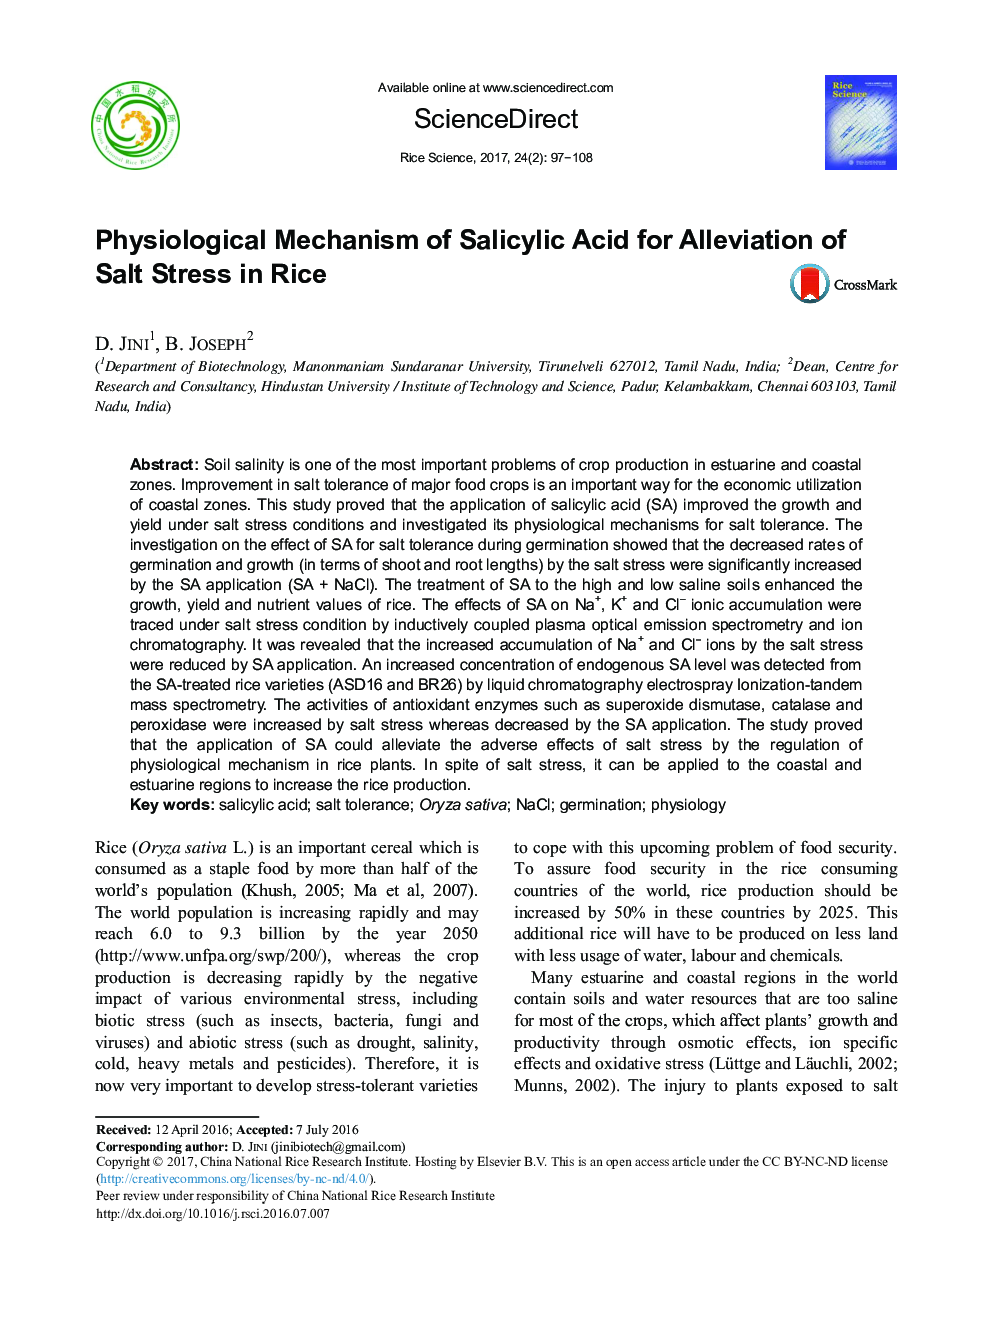 Physiological Mechanism of Salicylic Acid for Alleviation of Salt Stress in Rice